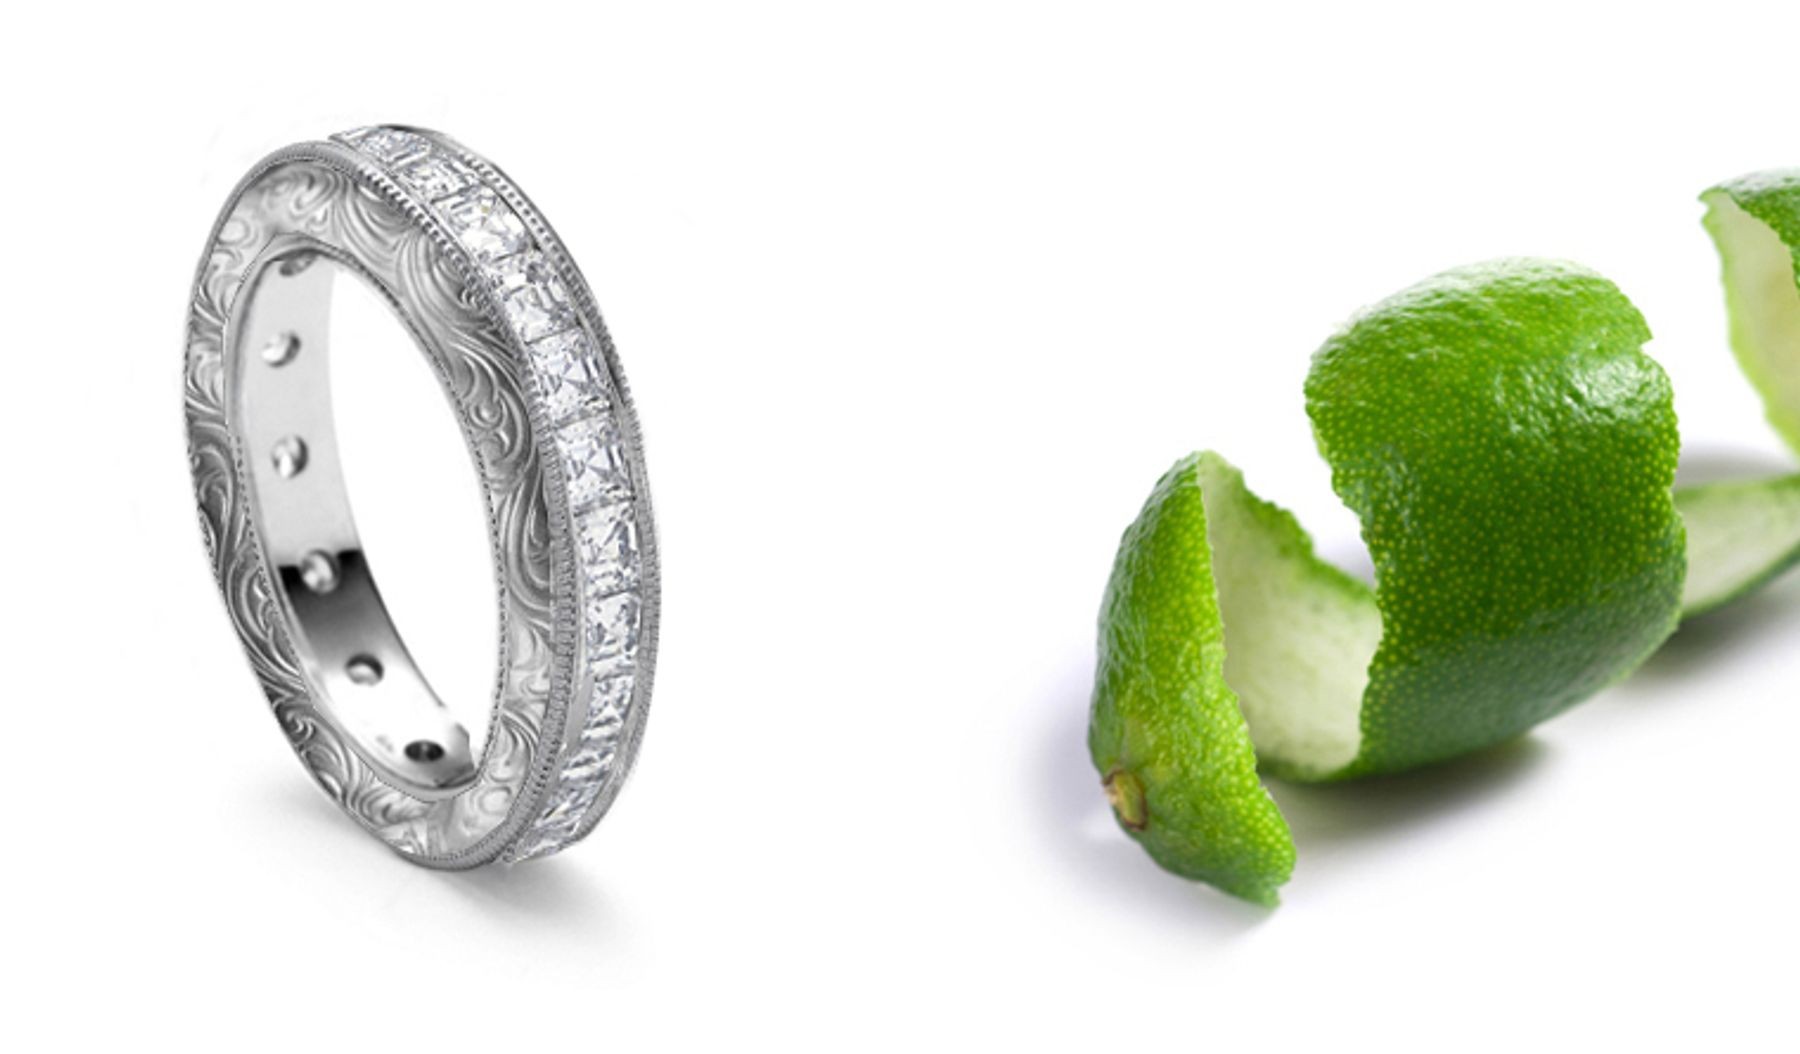 European Gem-Cutters Asscher Cut Diamond Anniversary Band Sides Profusely Embossed with Scroll, Floral & Leaf Motifs